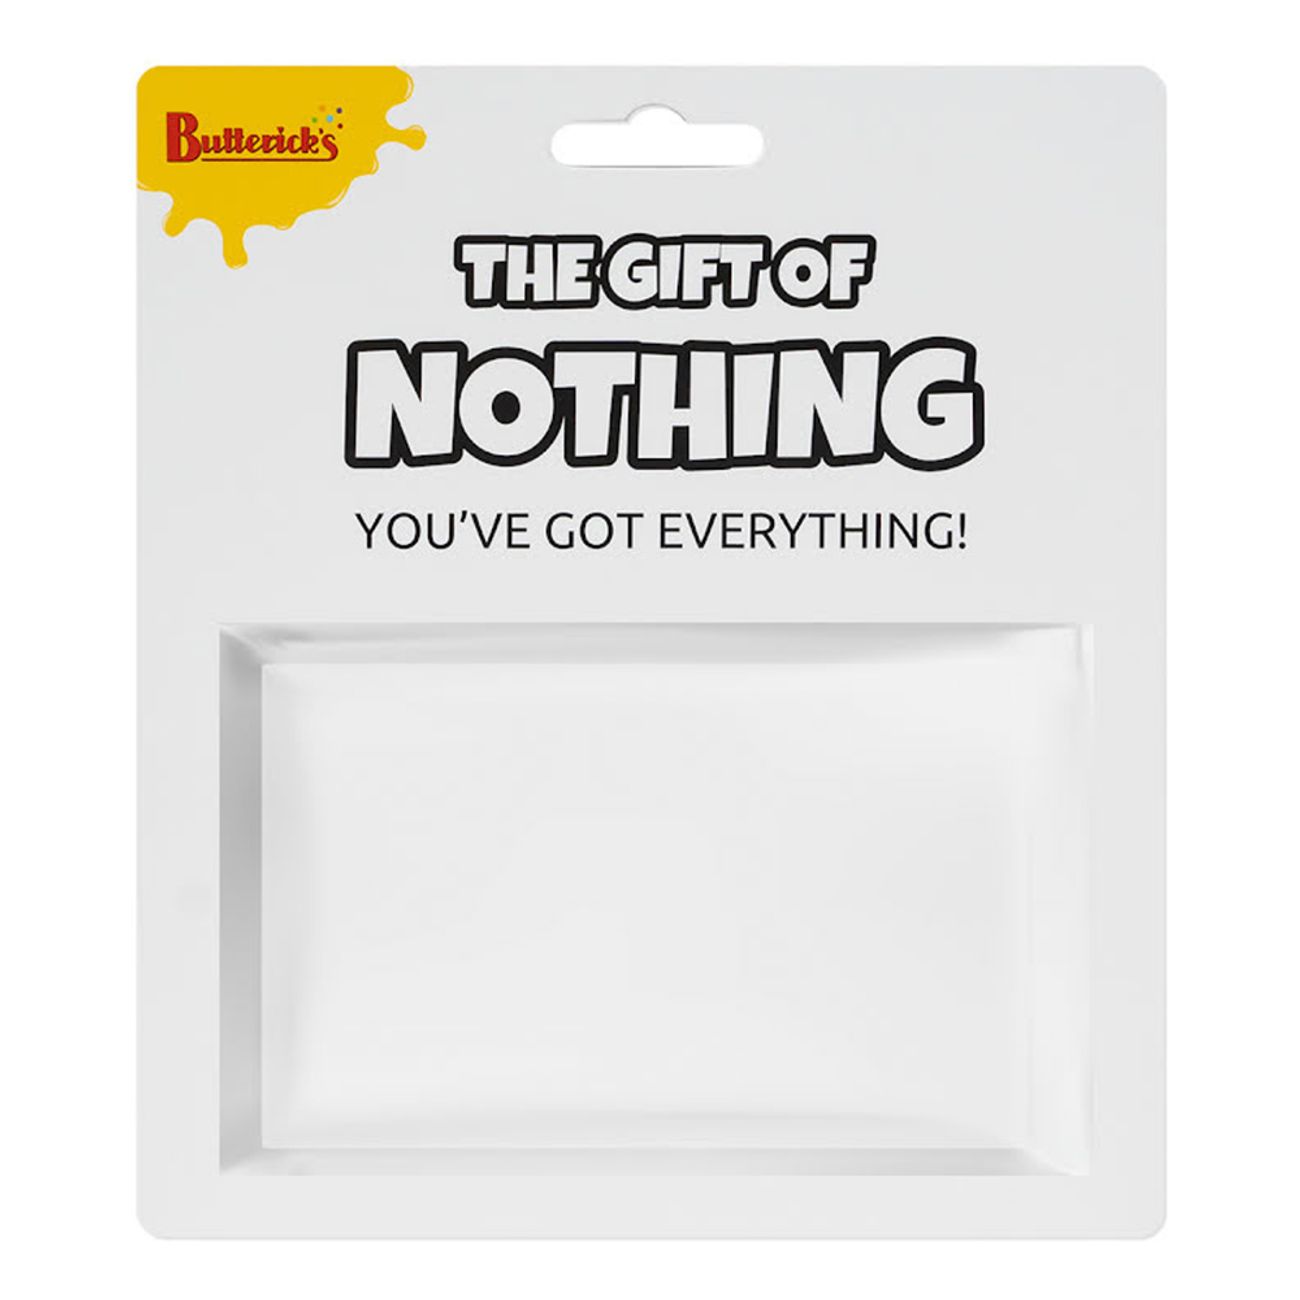 https://static.partyking.org/fit-in/1300x0/products/original/presenten-ingenting-the-gift-of-nothing-84712-2.jpg